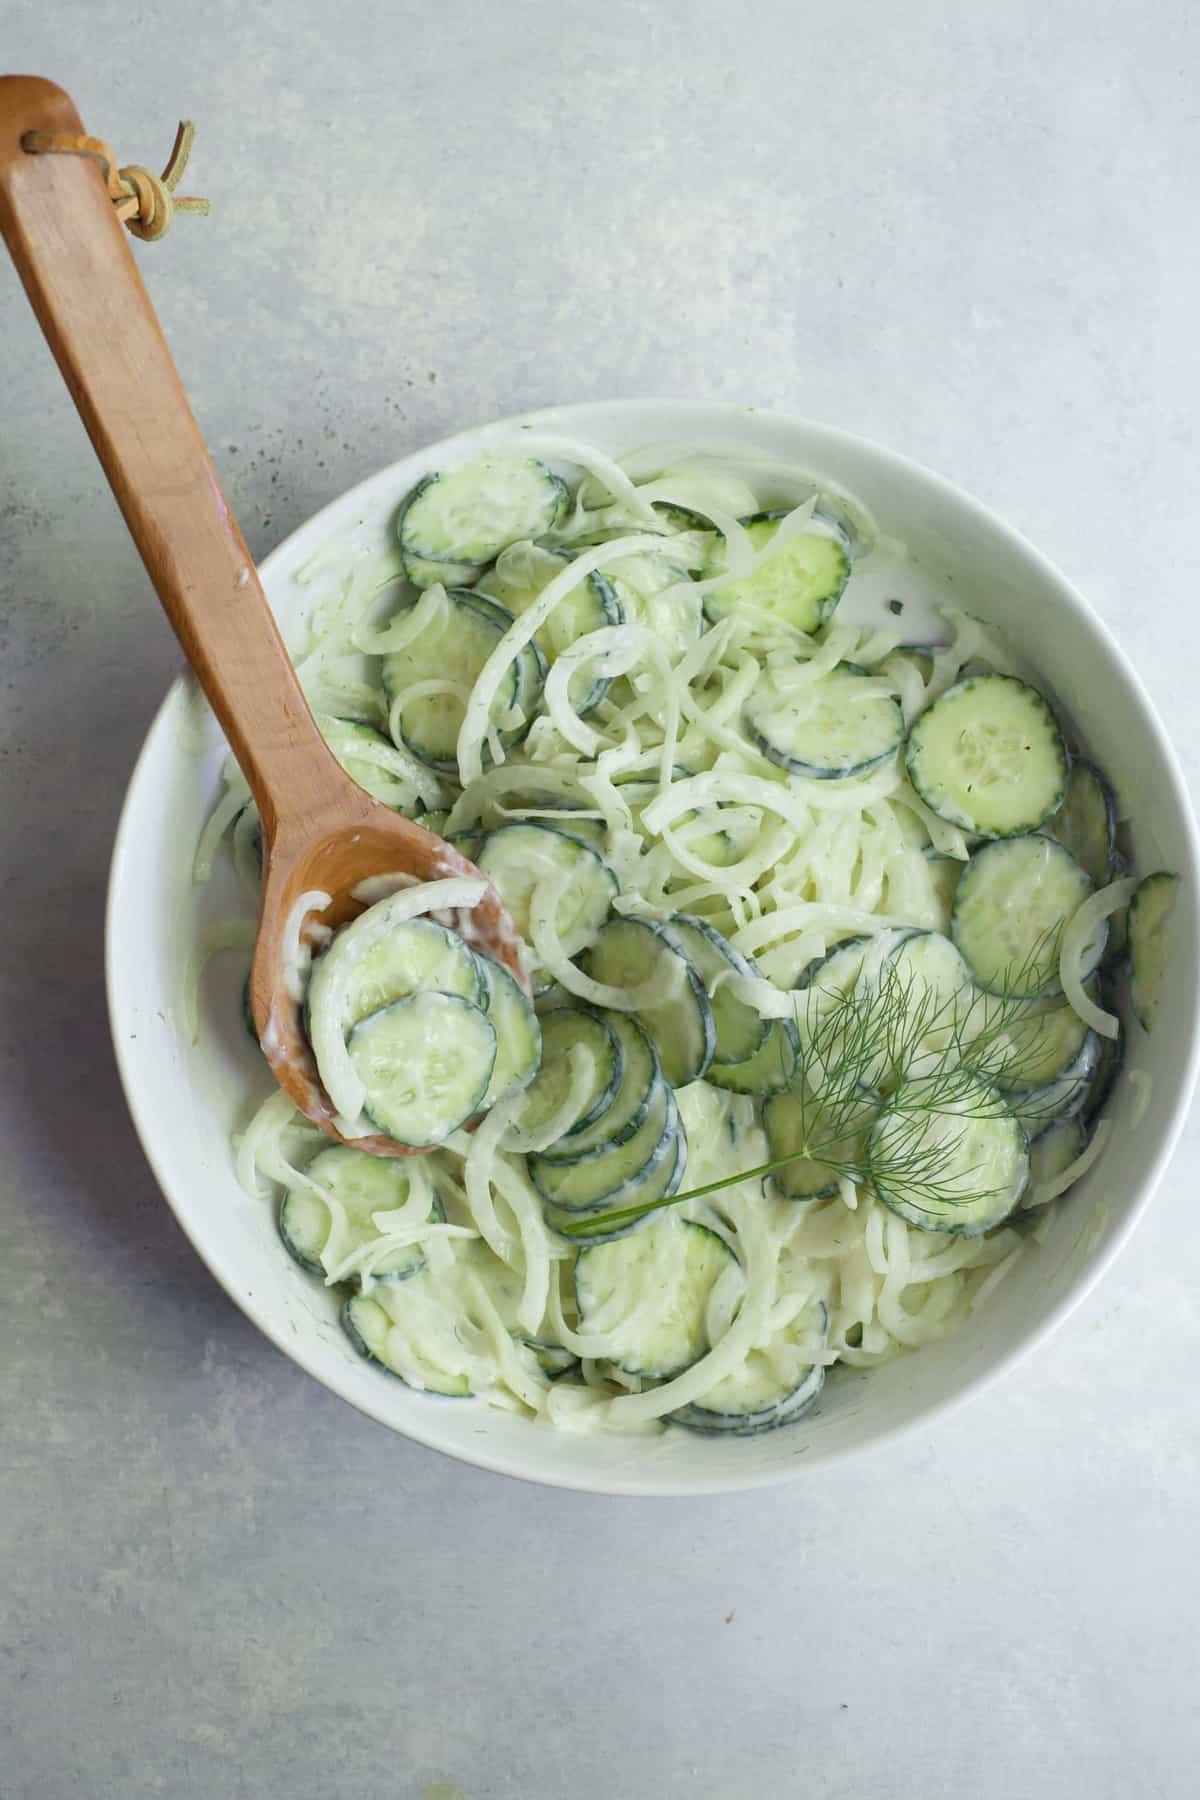 Overhead of dressed cucumber onion salad in a bow with a wooden spoon and fresh dill garnish.